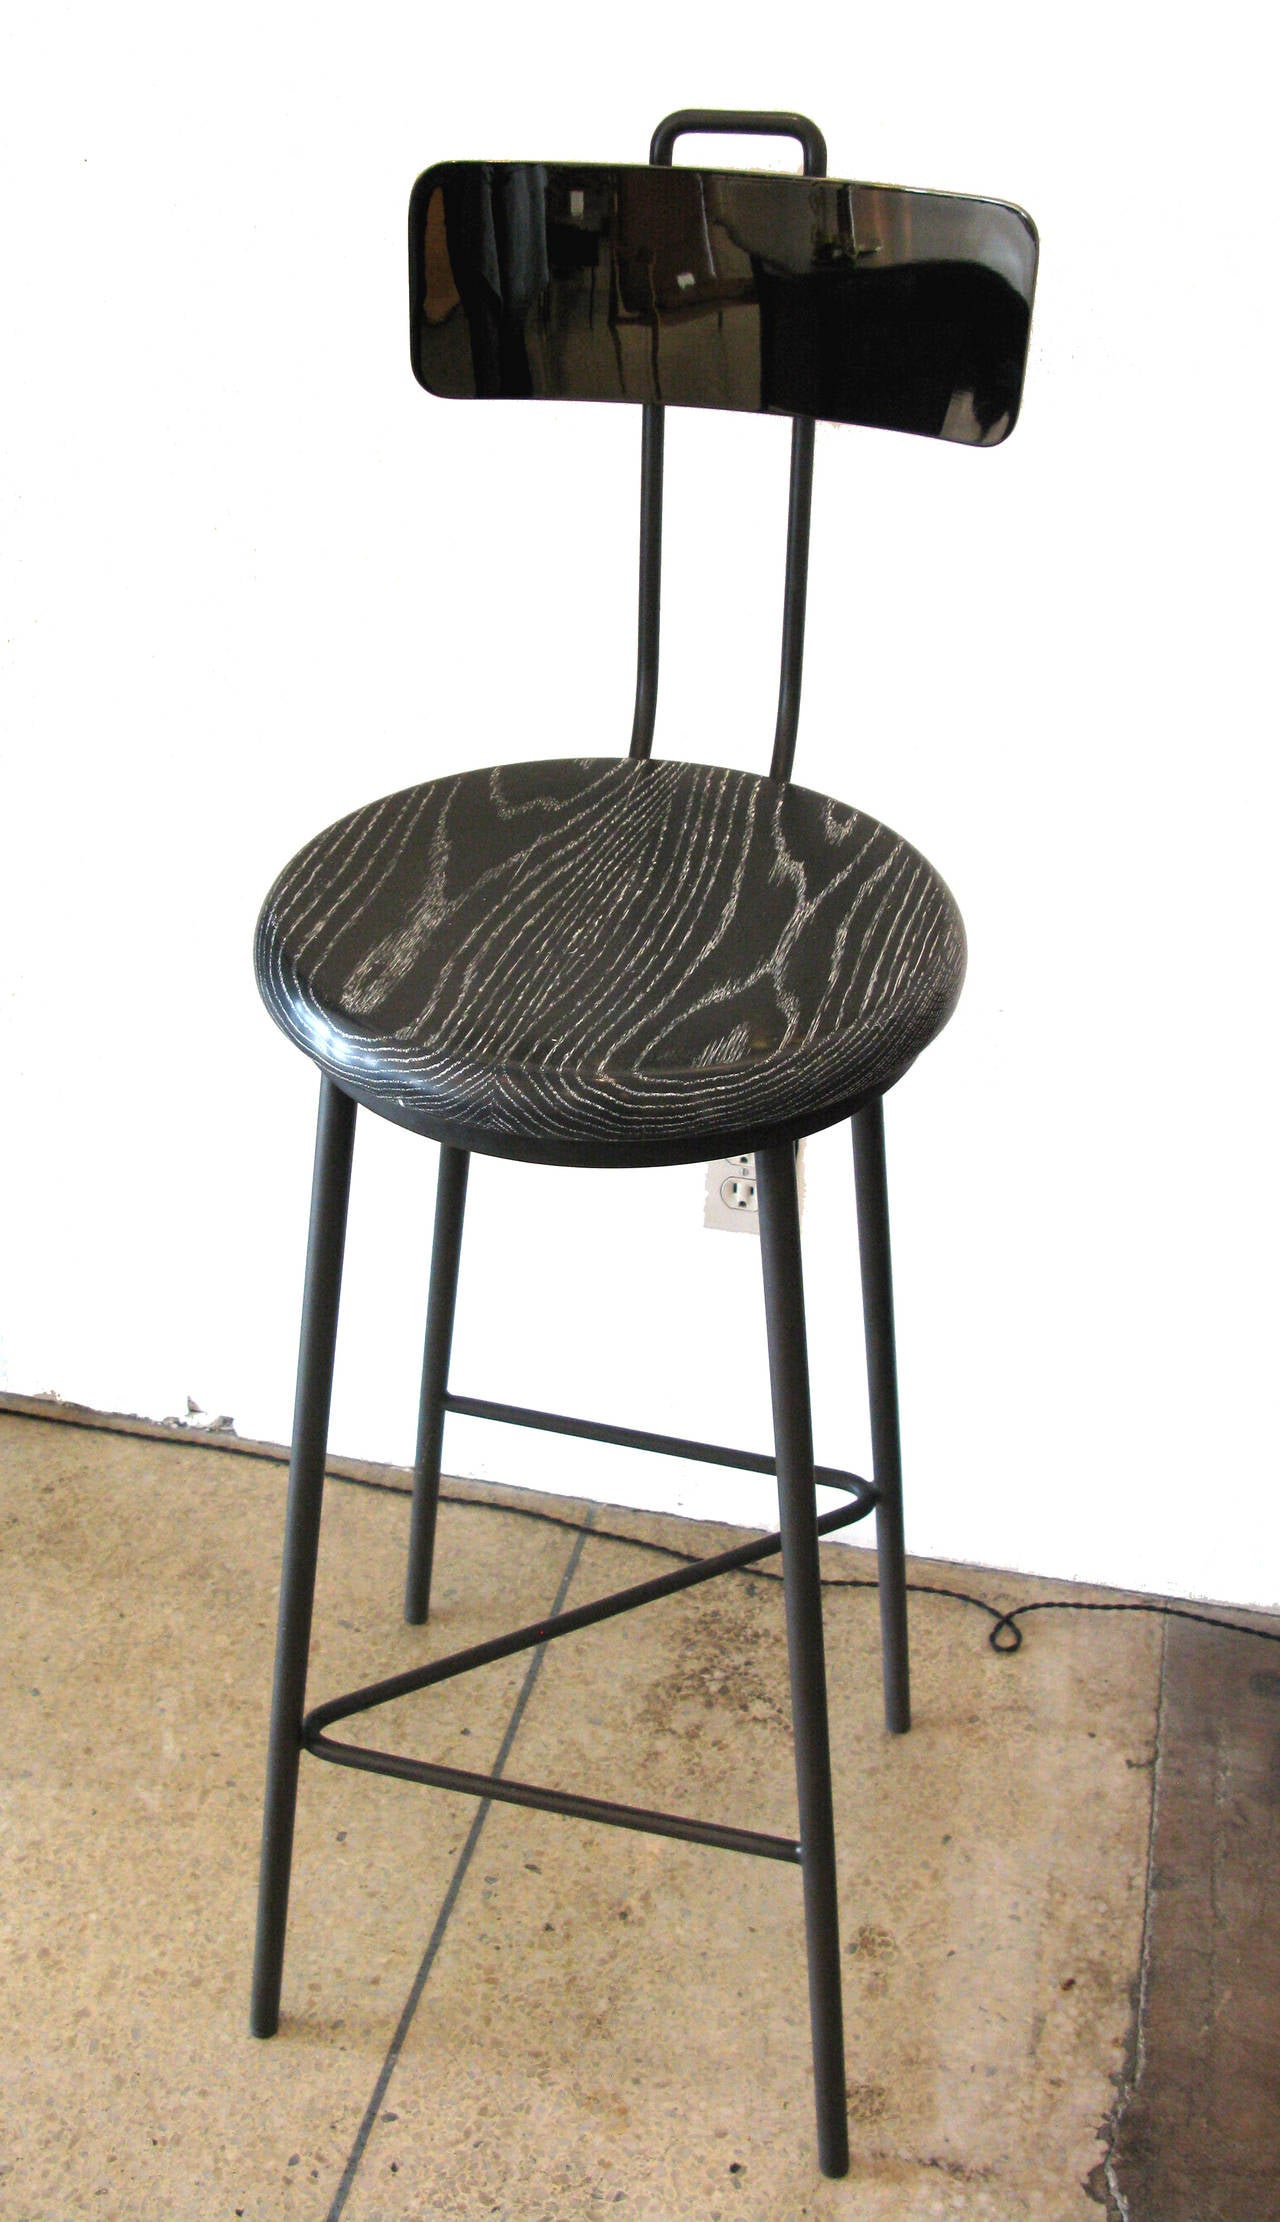 Matte oxidized black metal frame with an articulating backrest in polished black nickel. Base features a 